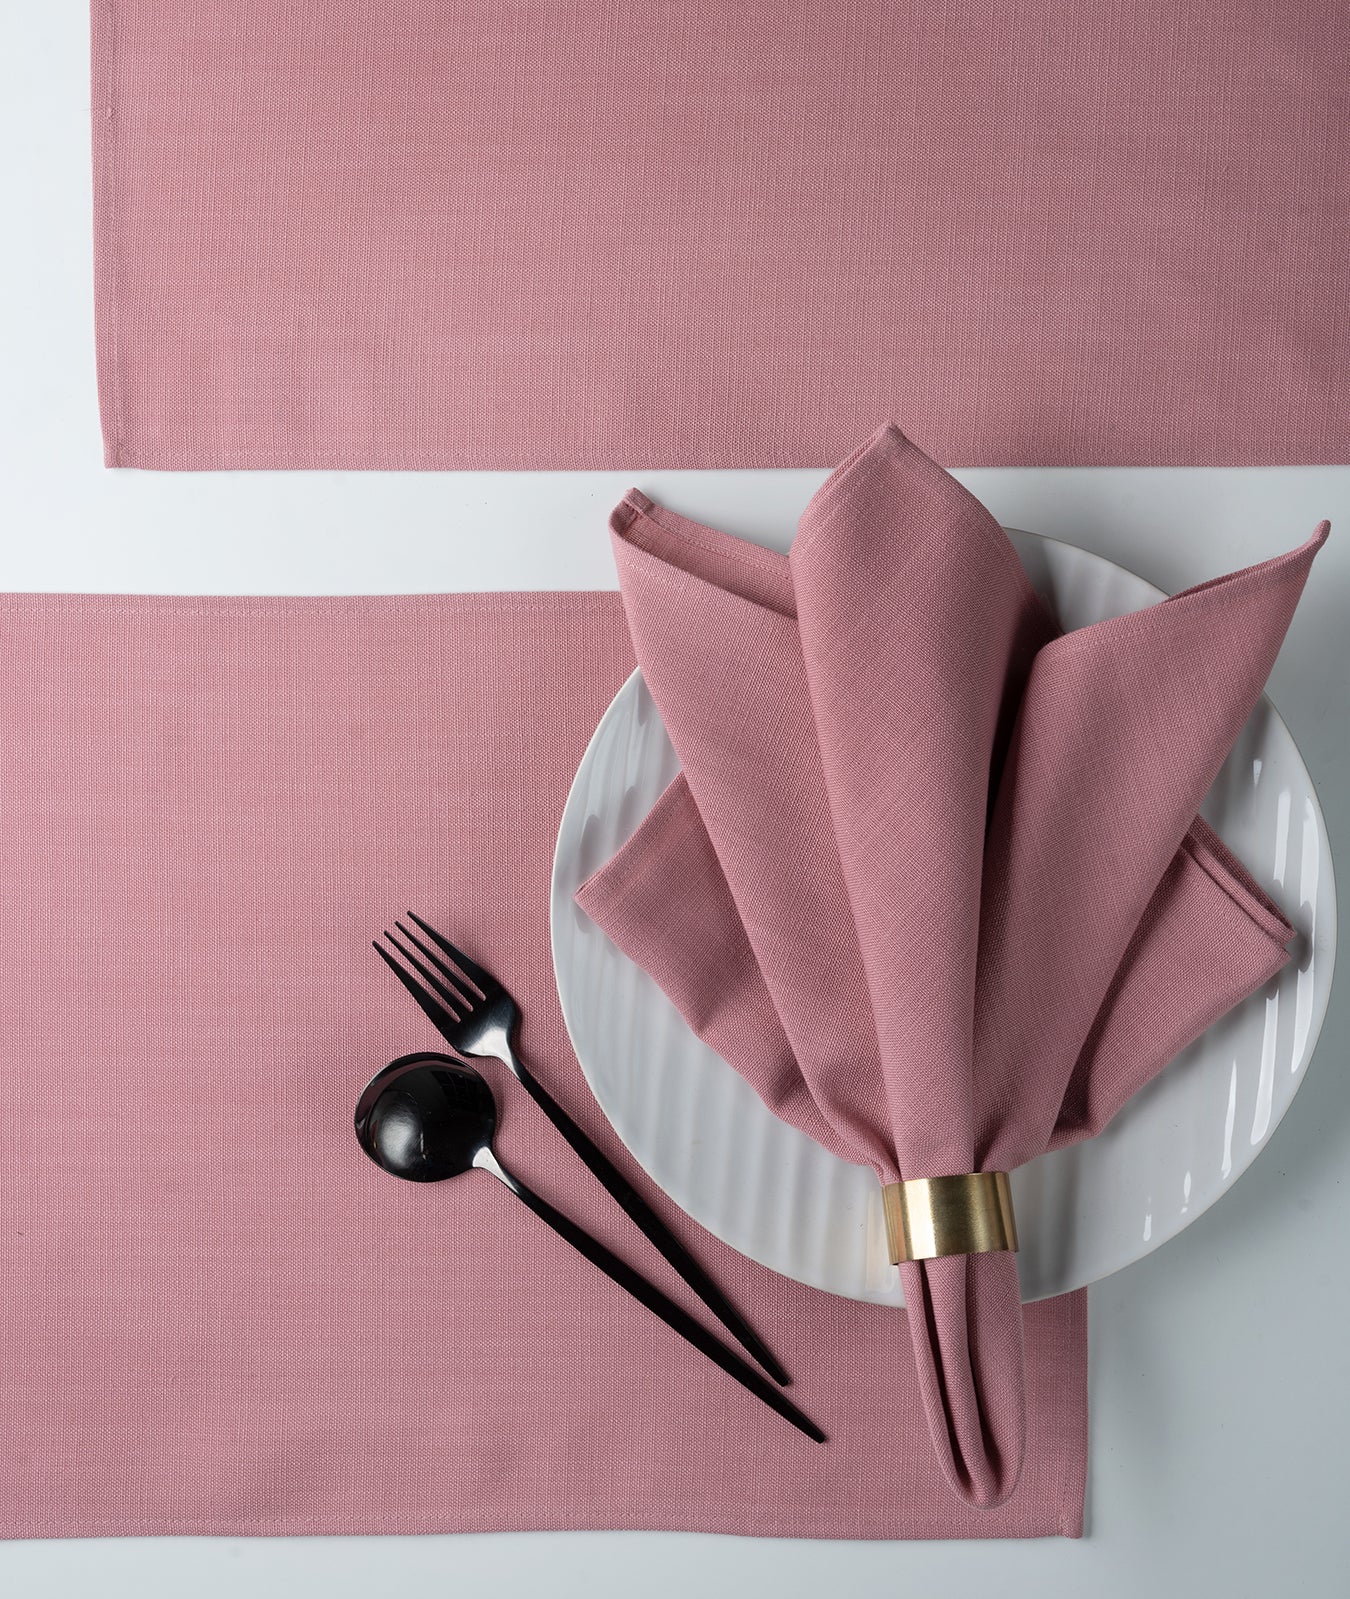 Dusty Pink Linen Textured Placemats 13 x 18 Inch Set of 4 - Plain